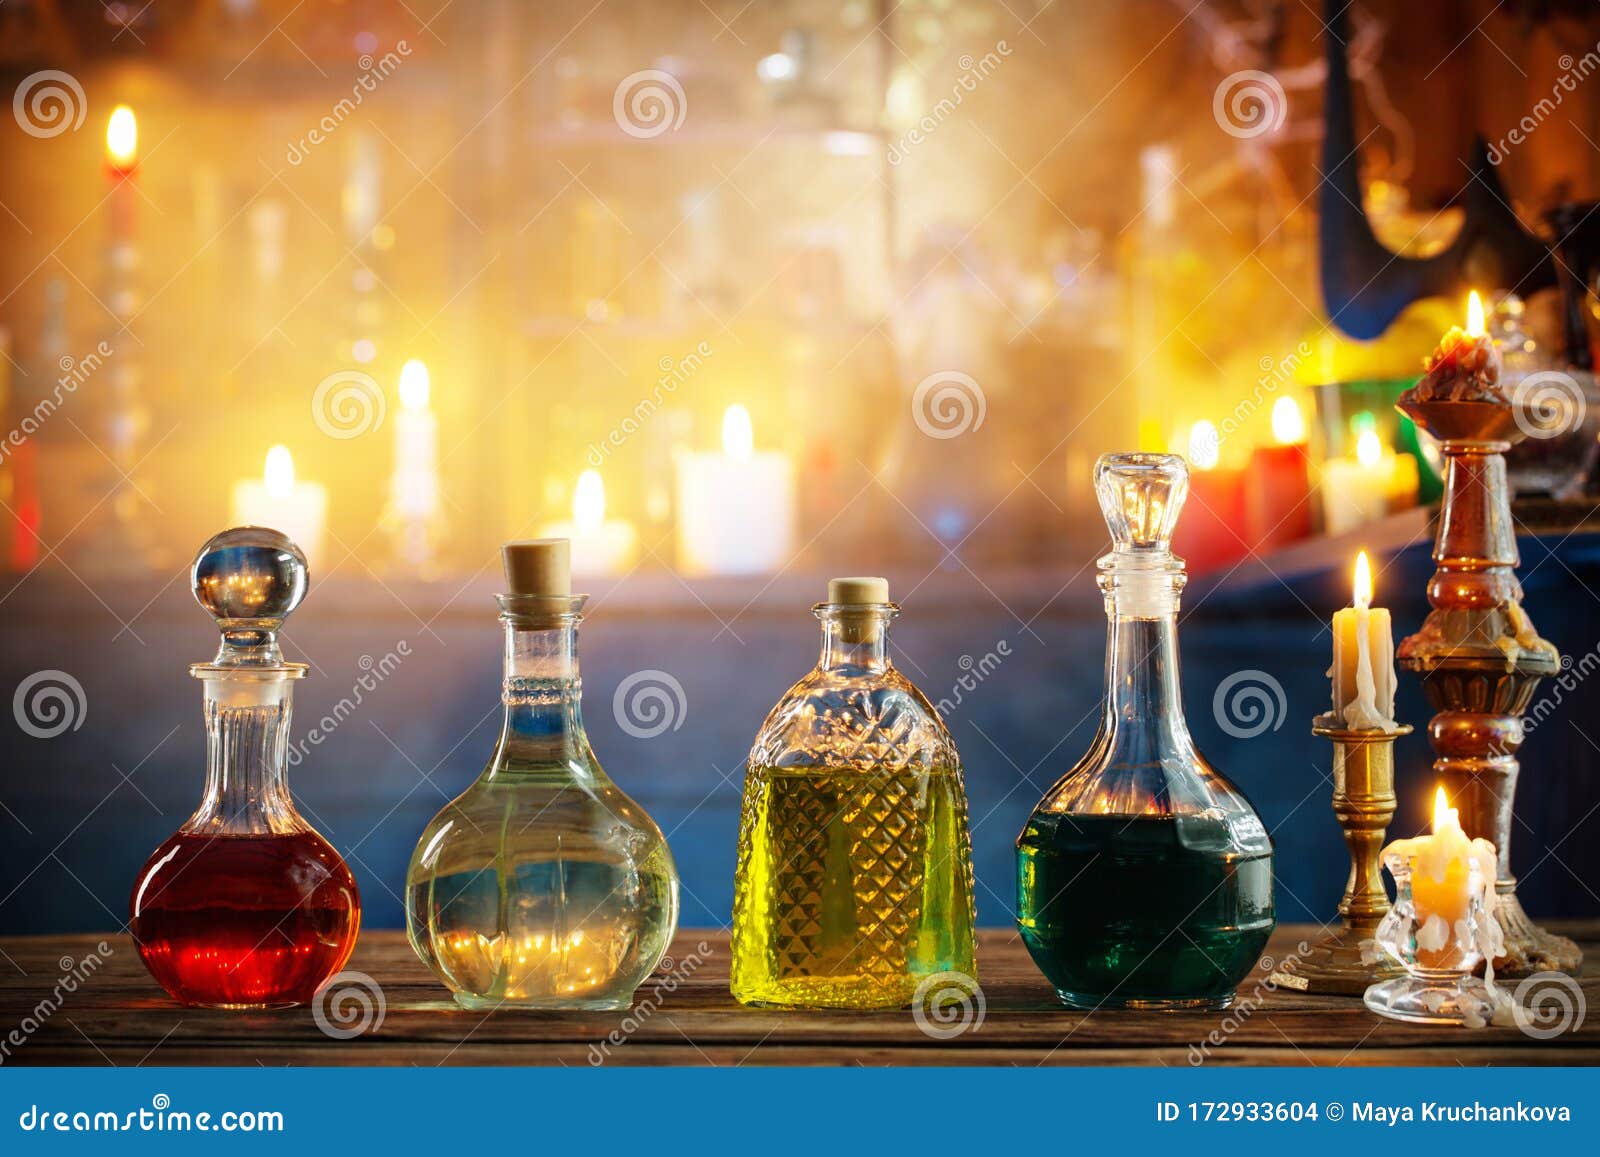 Magic Potions in Bottles on Wooden Background Stock Photo - Image of